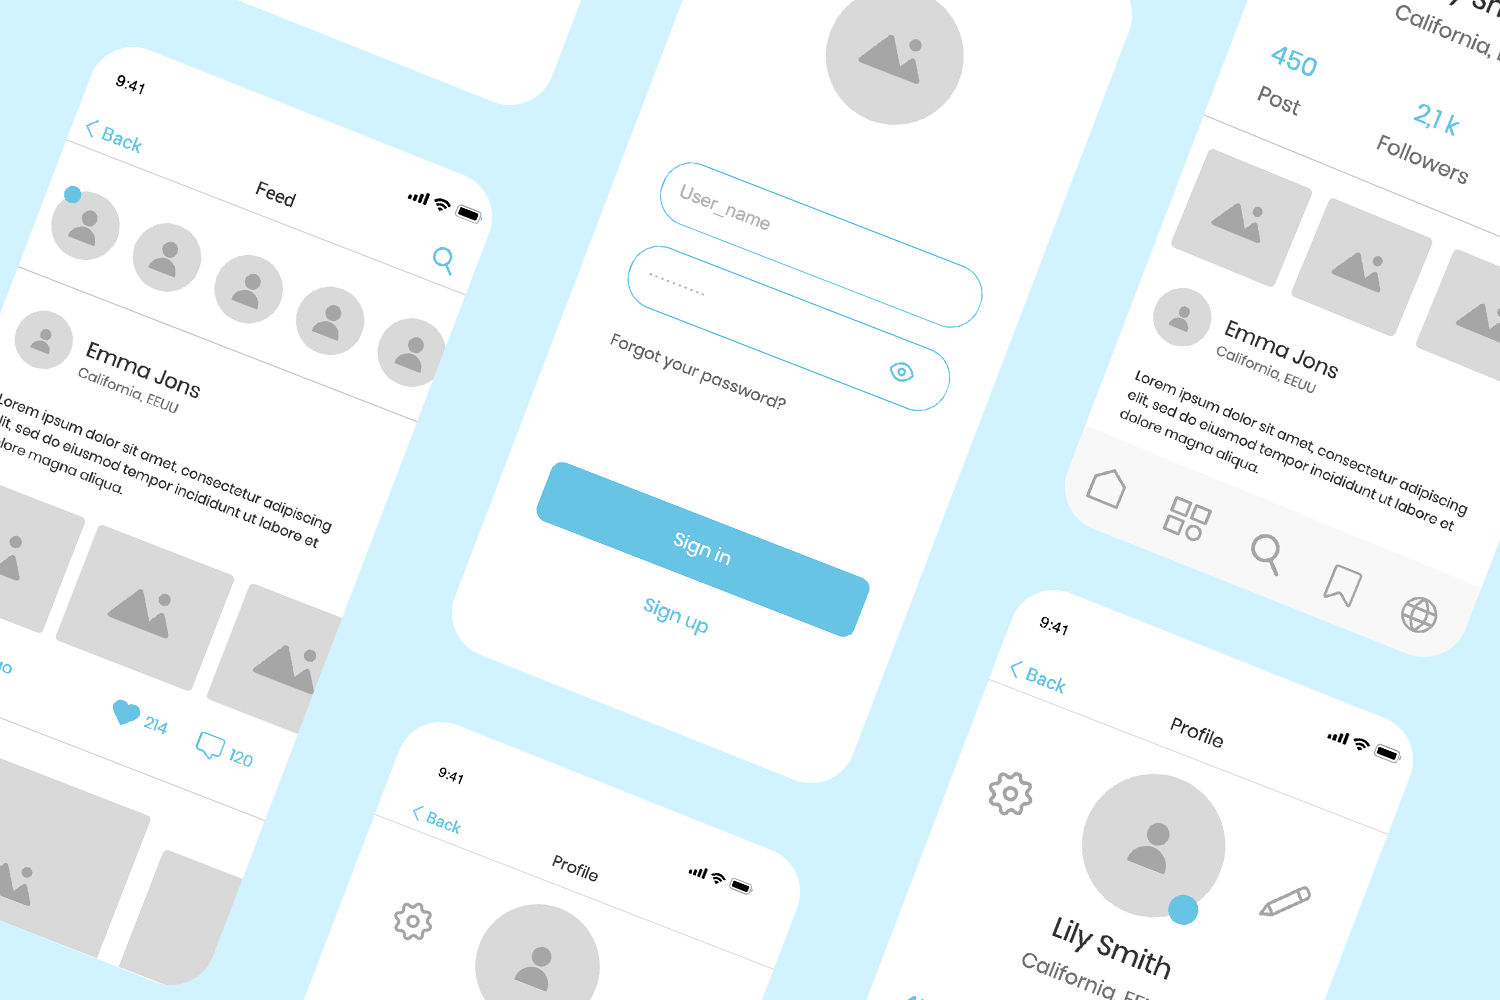 Mockup of a mobile community hub app showing various user interface screens for signing in, viewing profiles, and interacting with posts.